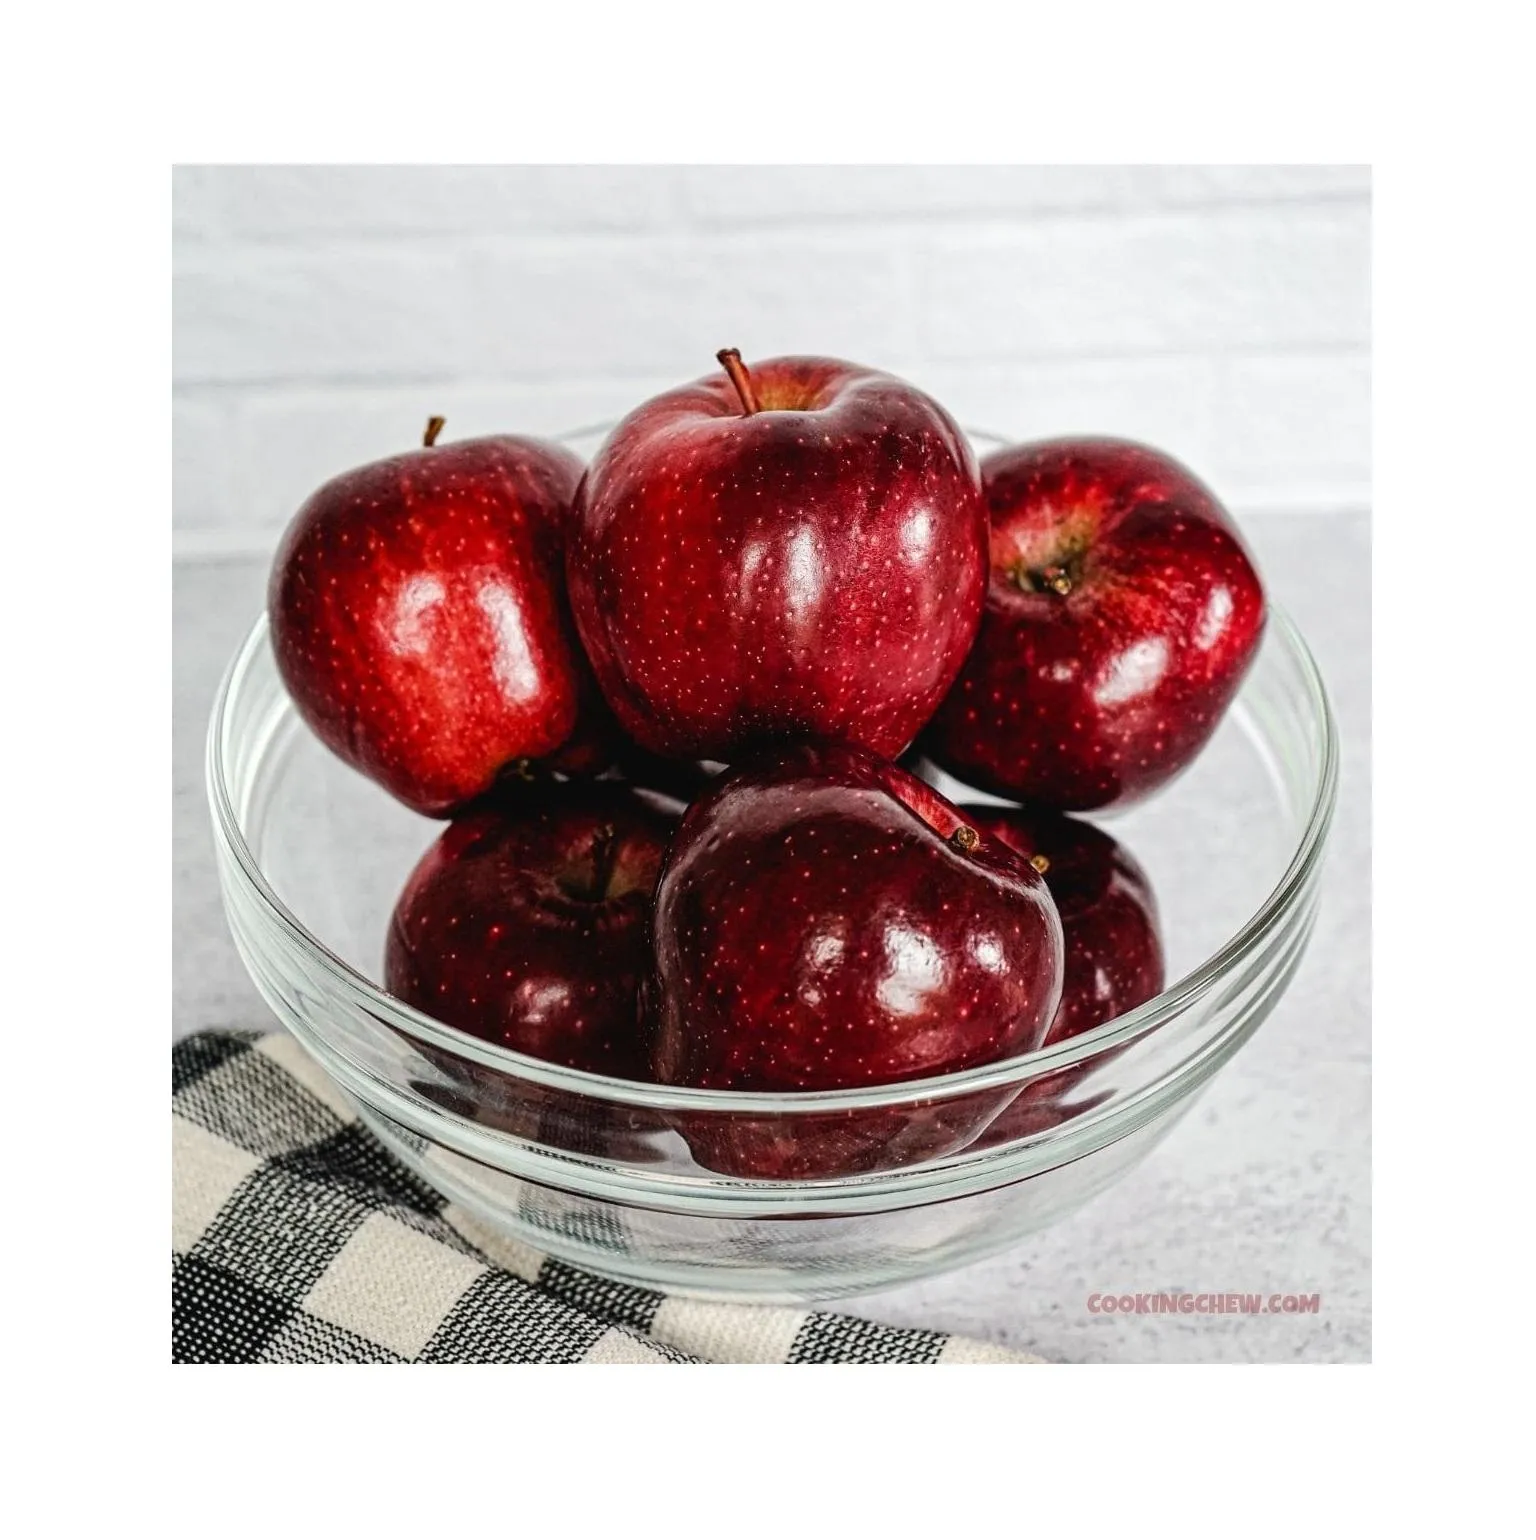 Buy and price of red delicious apples uk